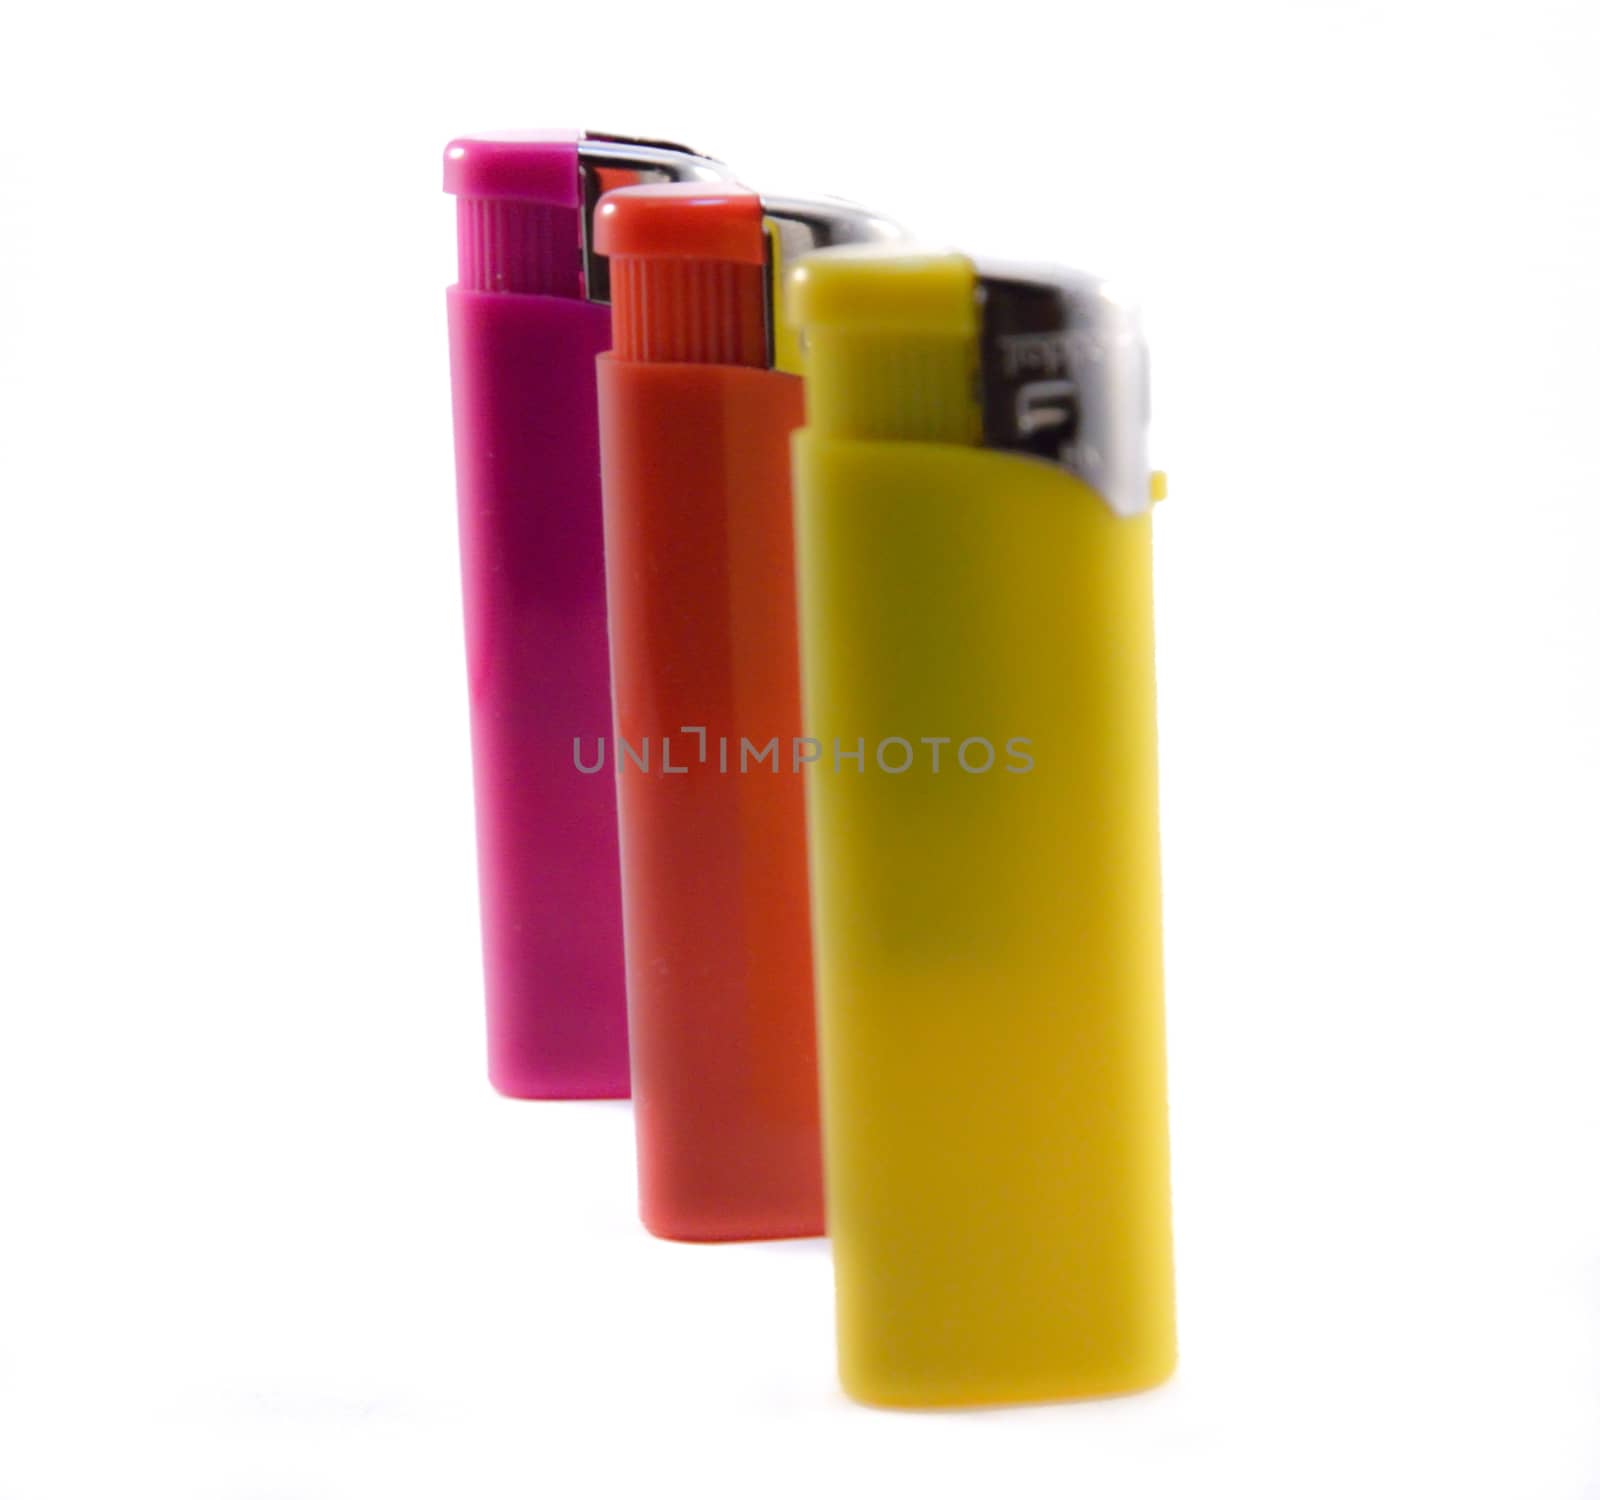 Three lighter and two focus one out of focus